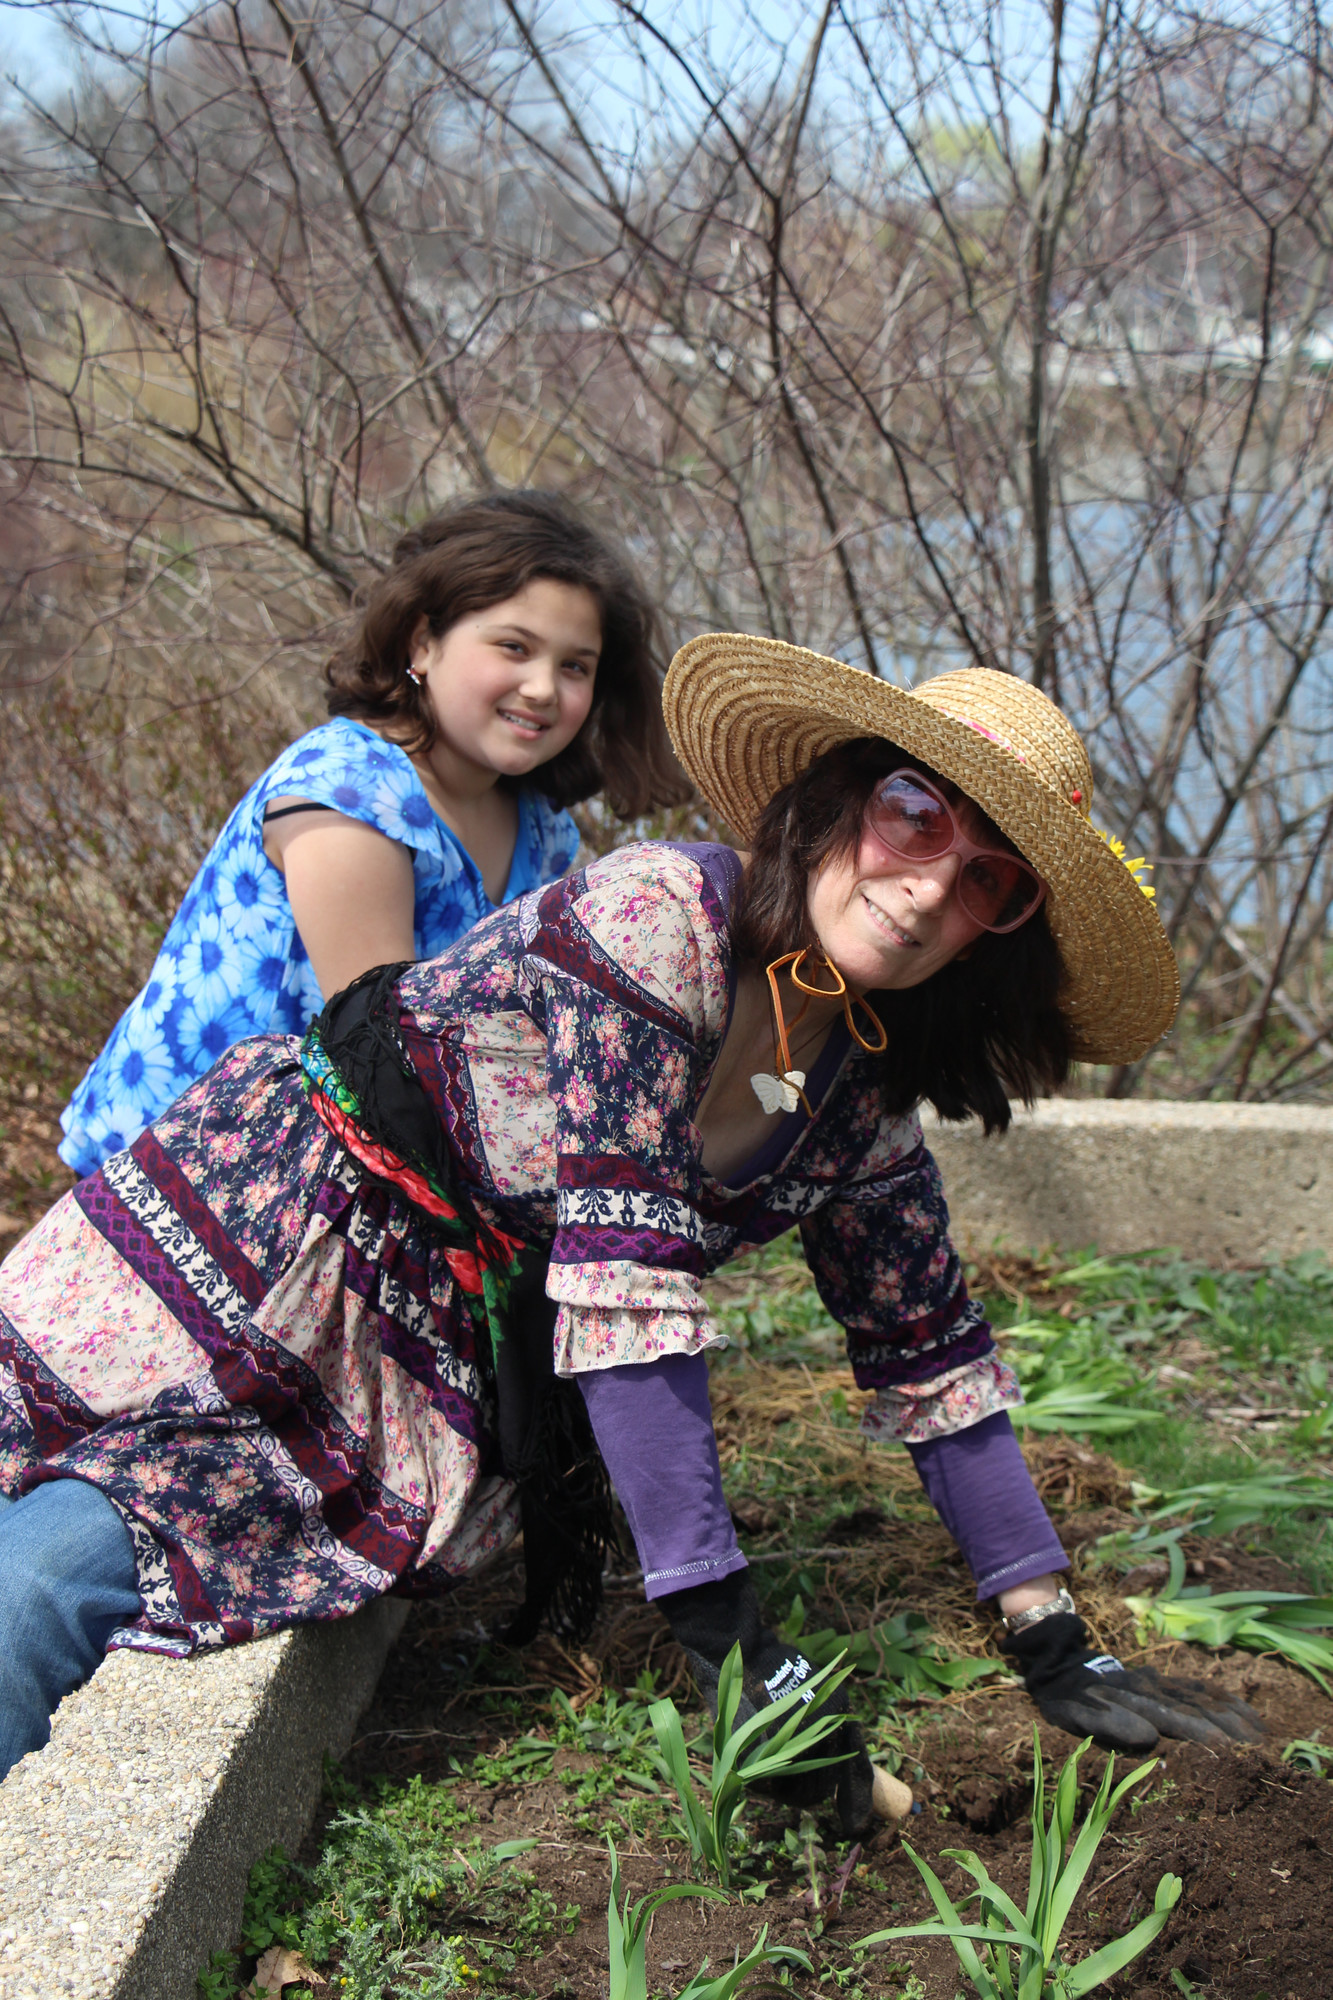 Ariana Potamonsis, 9, and Lucille Musto planted some flowers in a garden at Lofts Pond Park.